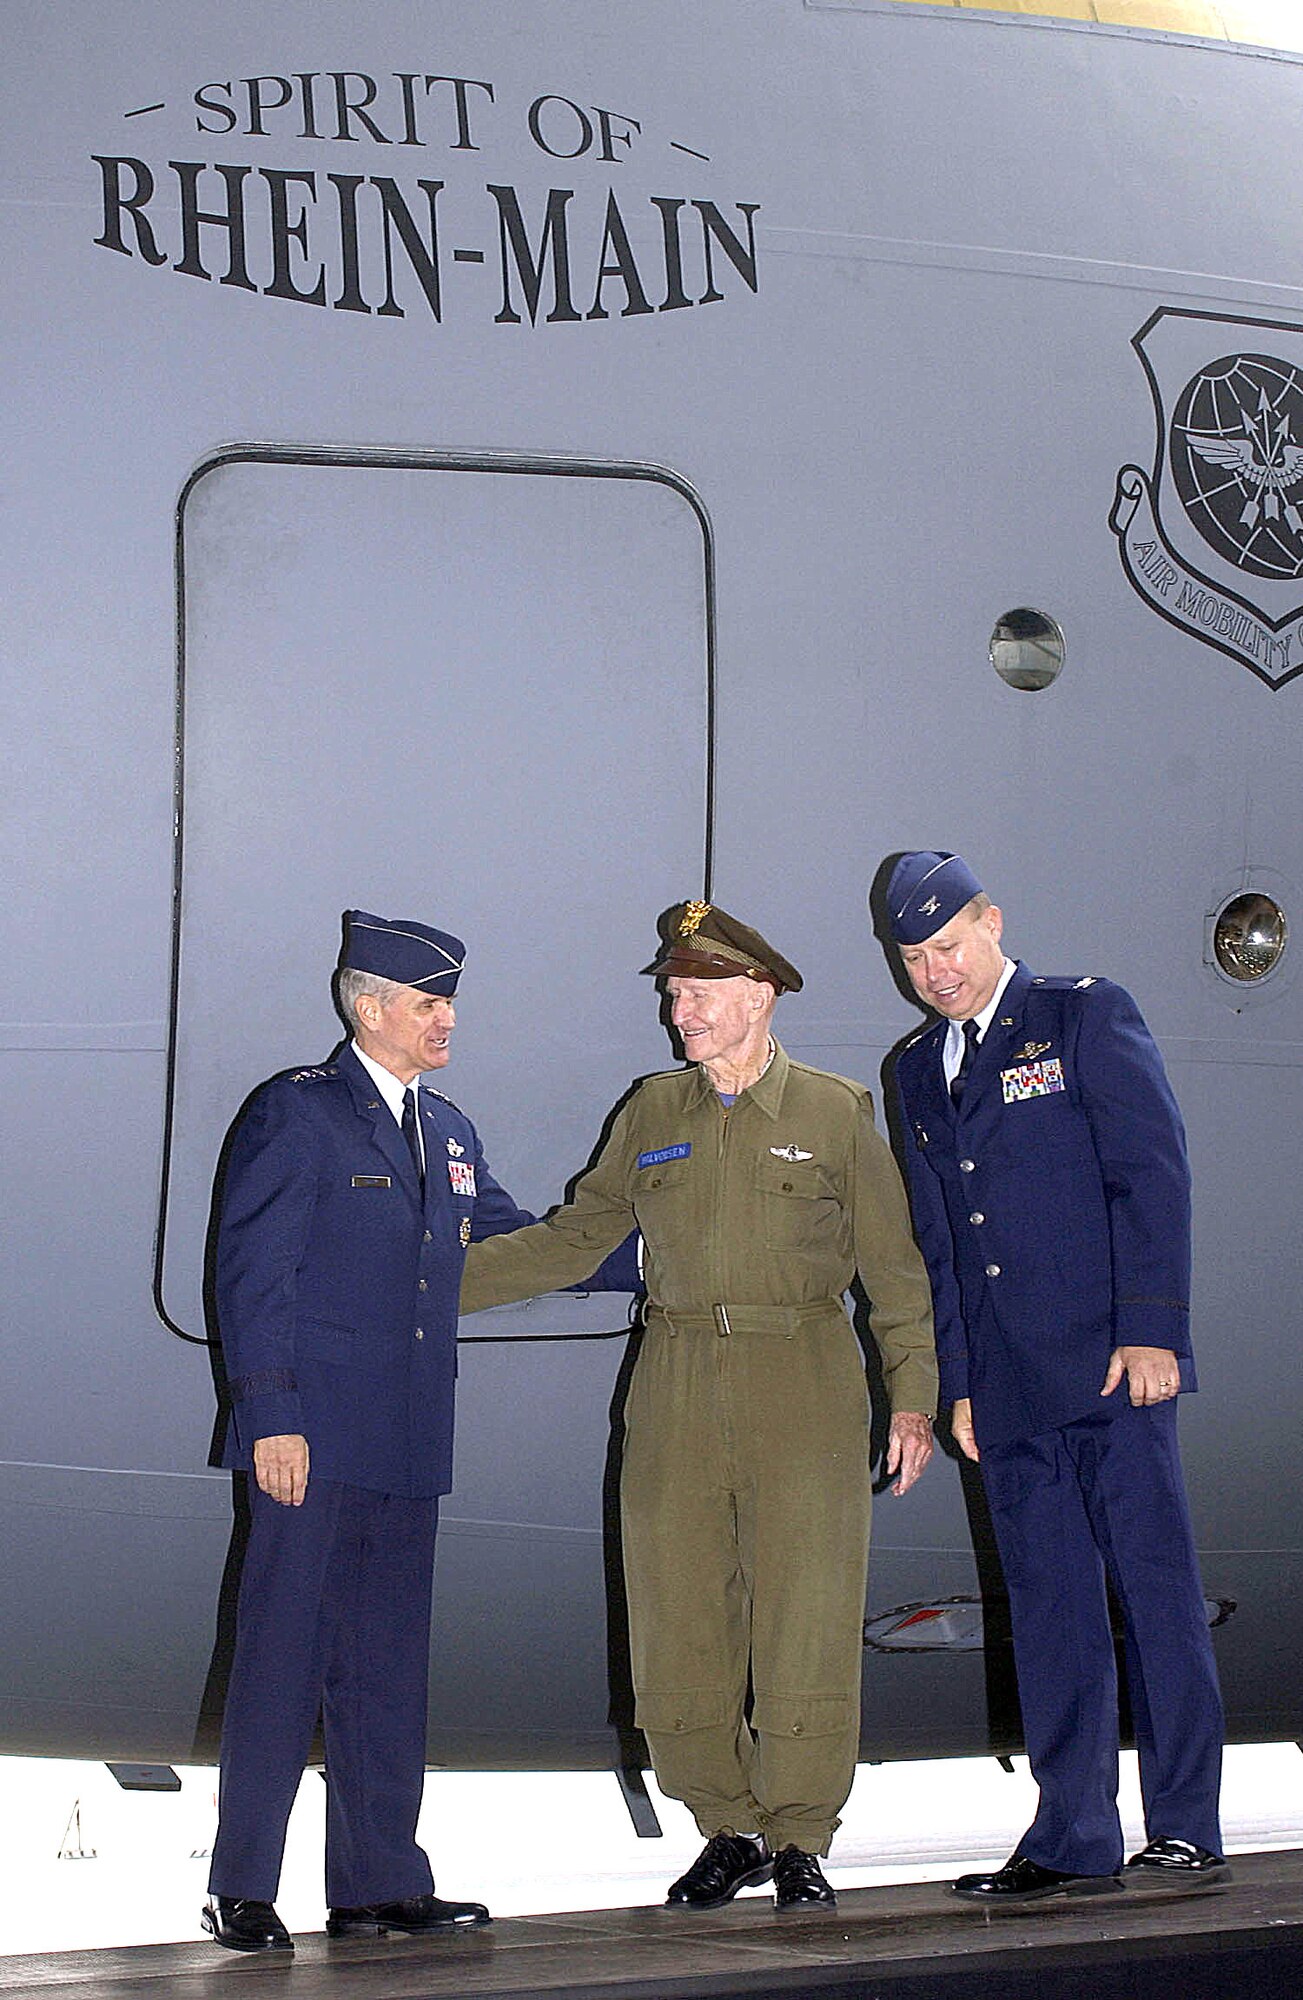 RHEIN-MAIN AIR BASE, Germany - (From left) Lt. Gen. Christopher A. Kelley, Air Mobility Command vice commander; retired Lt. Col. Gail Halvorsen; and Col. Bradley Denison, 469th Air Base Group commander, unveil the newly named C-17 Globemaster III "Spirit of Rhein-Main" during the base closure ceremony here Oct. 10. The ceremony officially marked an end of 60 years of airlift history. Flying at the base ended Sept. 30 and the "Gateway to Europe" will transition to Ramstein and Spangdahlem Air Bases in Germany. (U.S. Air Force photo by Staff Sgt. Marie Cassetty)